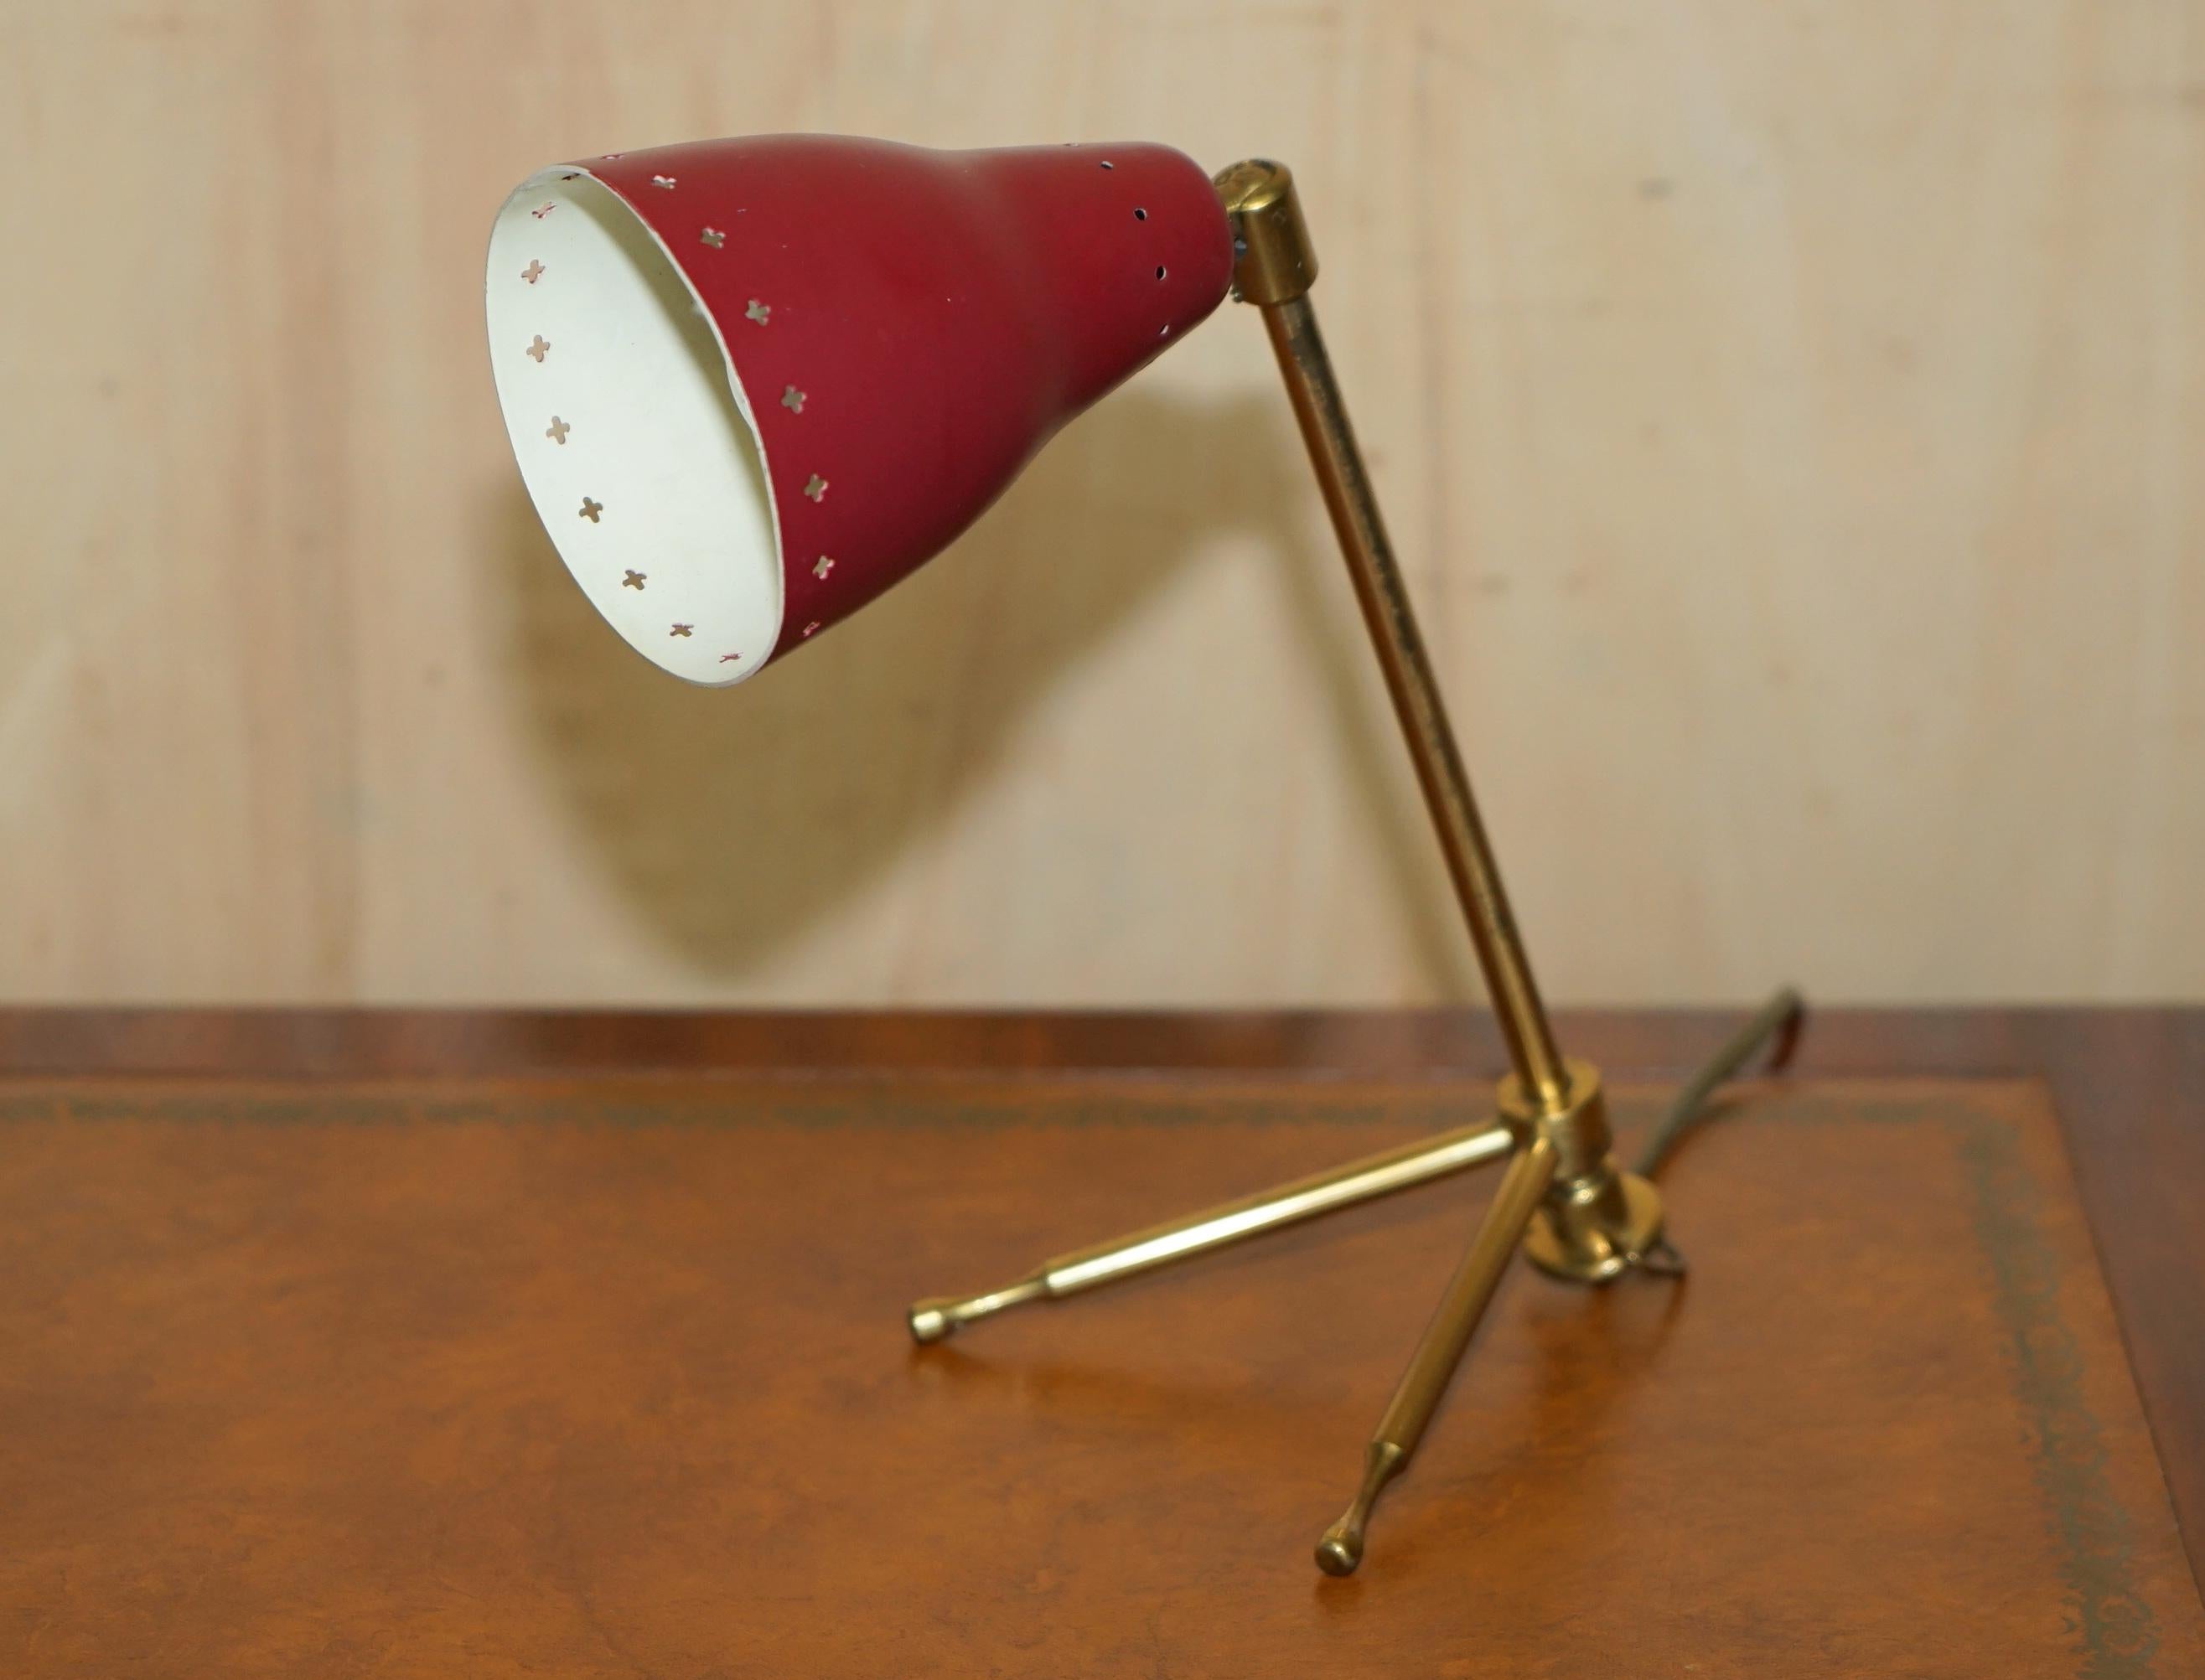 Royal House Antiques

Royal House Antiques is delighted to offer for sale this original circa 1950's Mid Century Modern, super collectable Boris Lacroix table lamp

Please note the delivery fee listed is just a guide, it covers within the M25 only